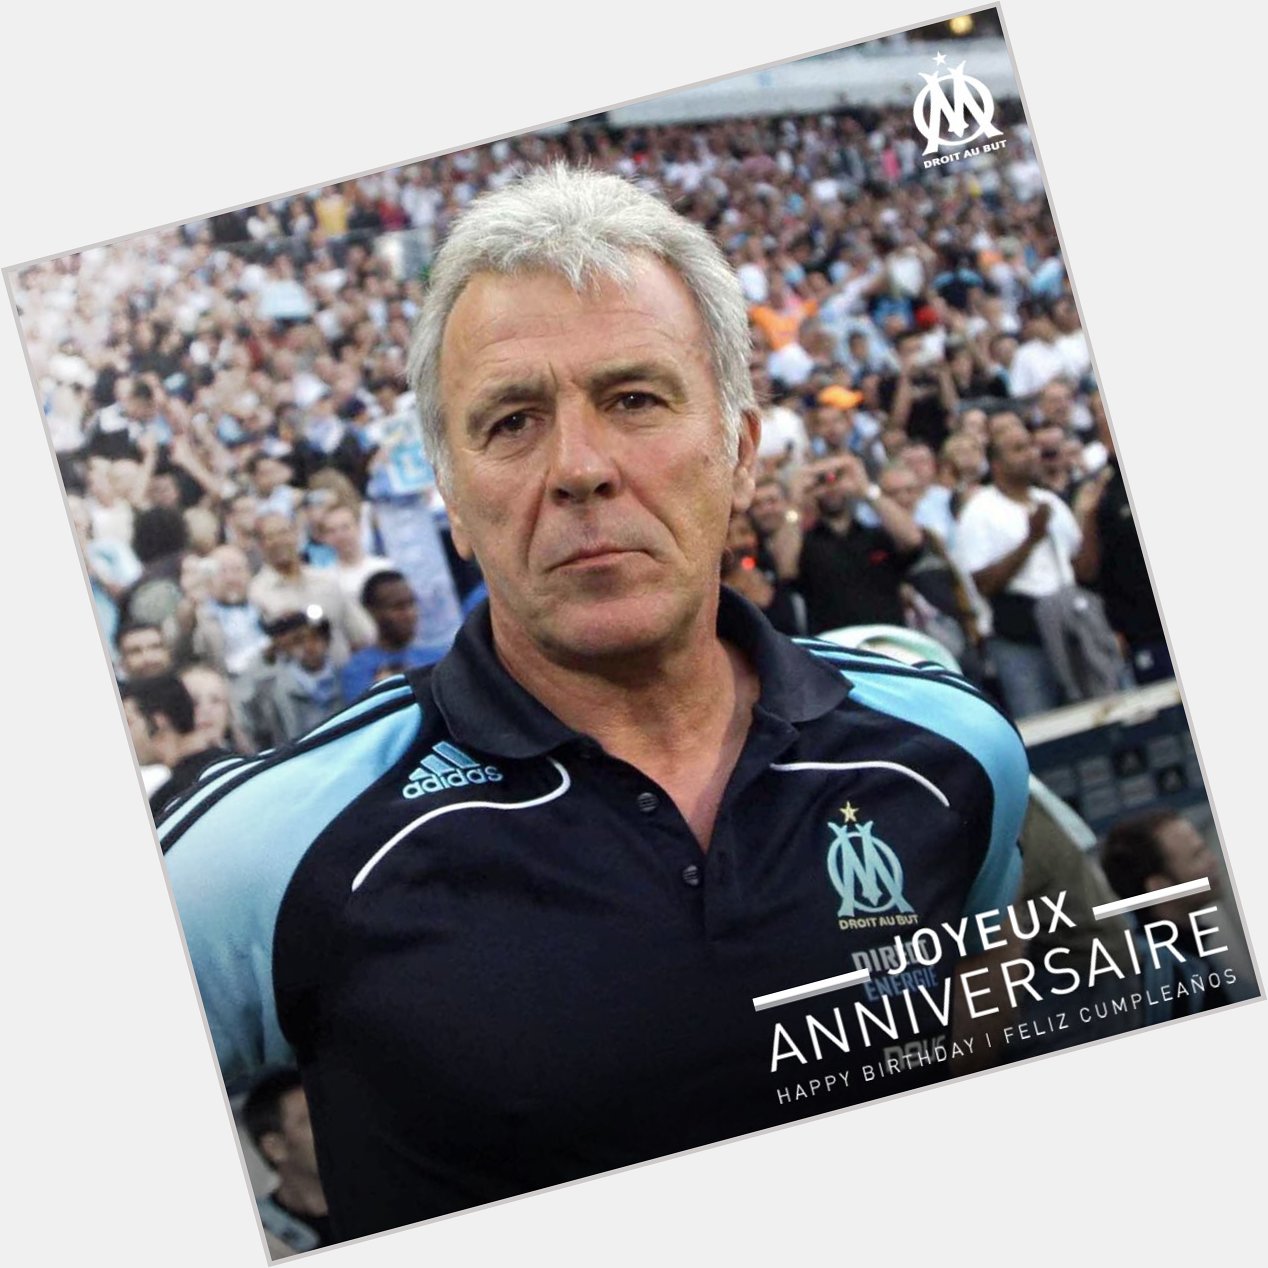   Happy Birthday to our former boss Eric Gerets!   2  0  0  7  - 2  0  0  9   